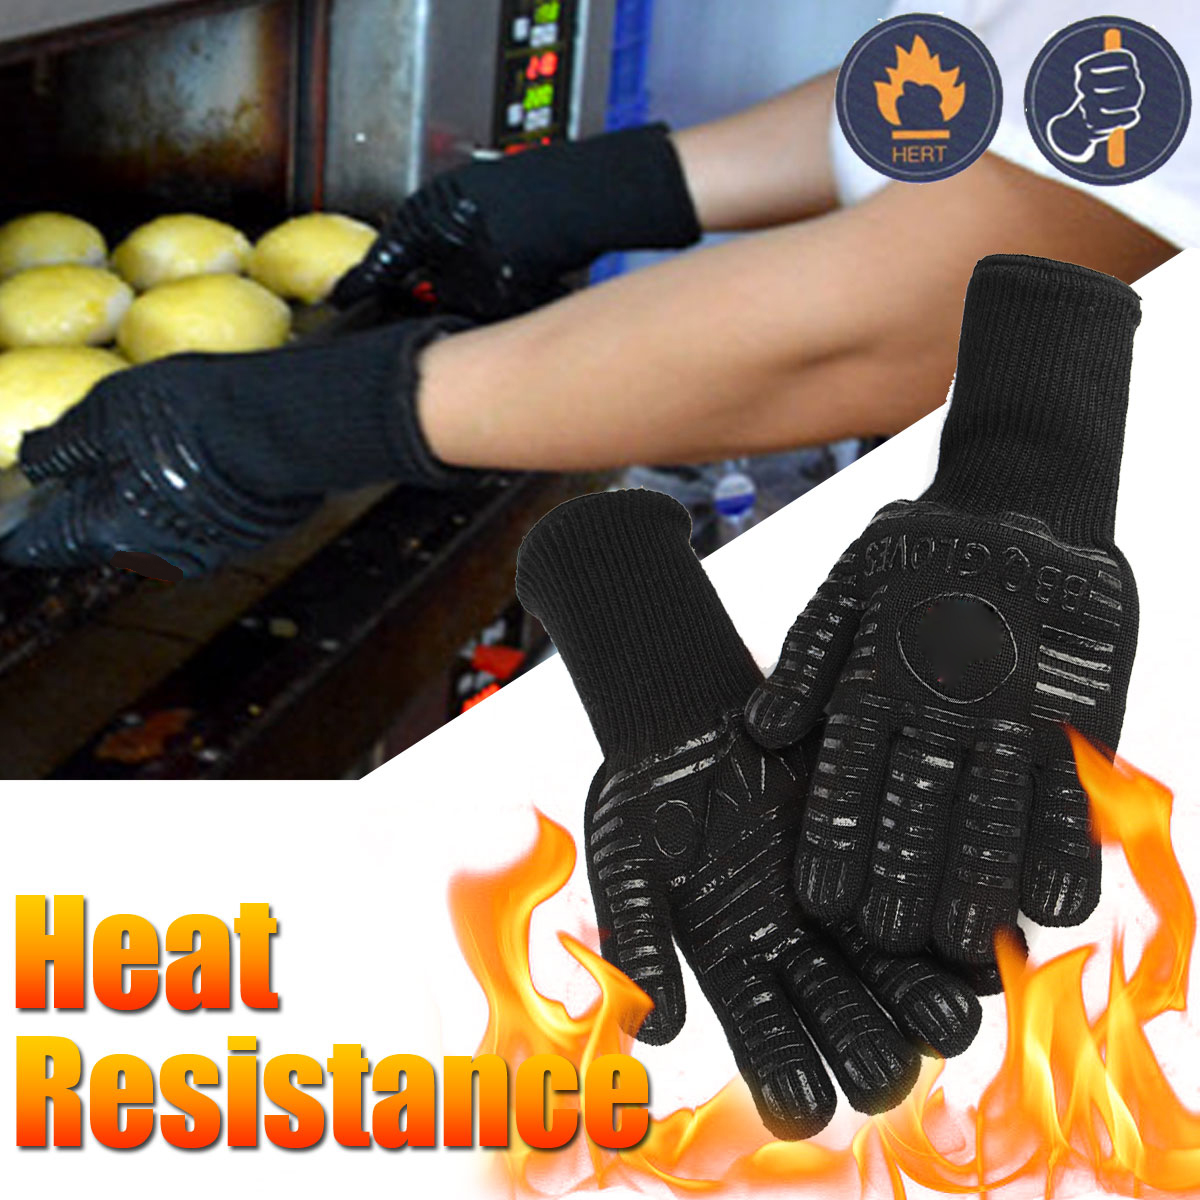 Lengthen-Insulate-Anti-skid-Glove-Heat-Resistance-Gloves-For-BBQ-Oven-Grill-Cook-Bake-1281222